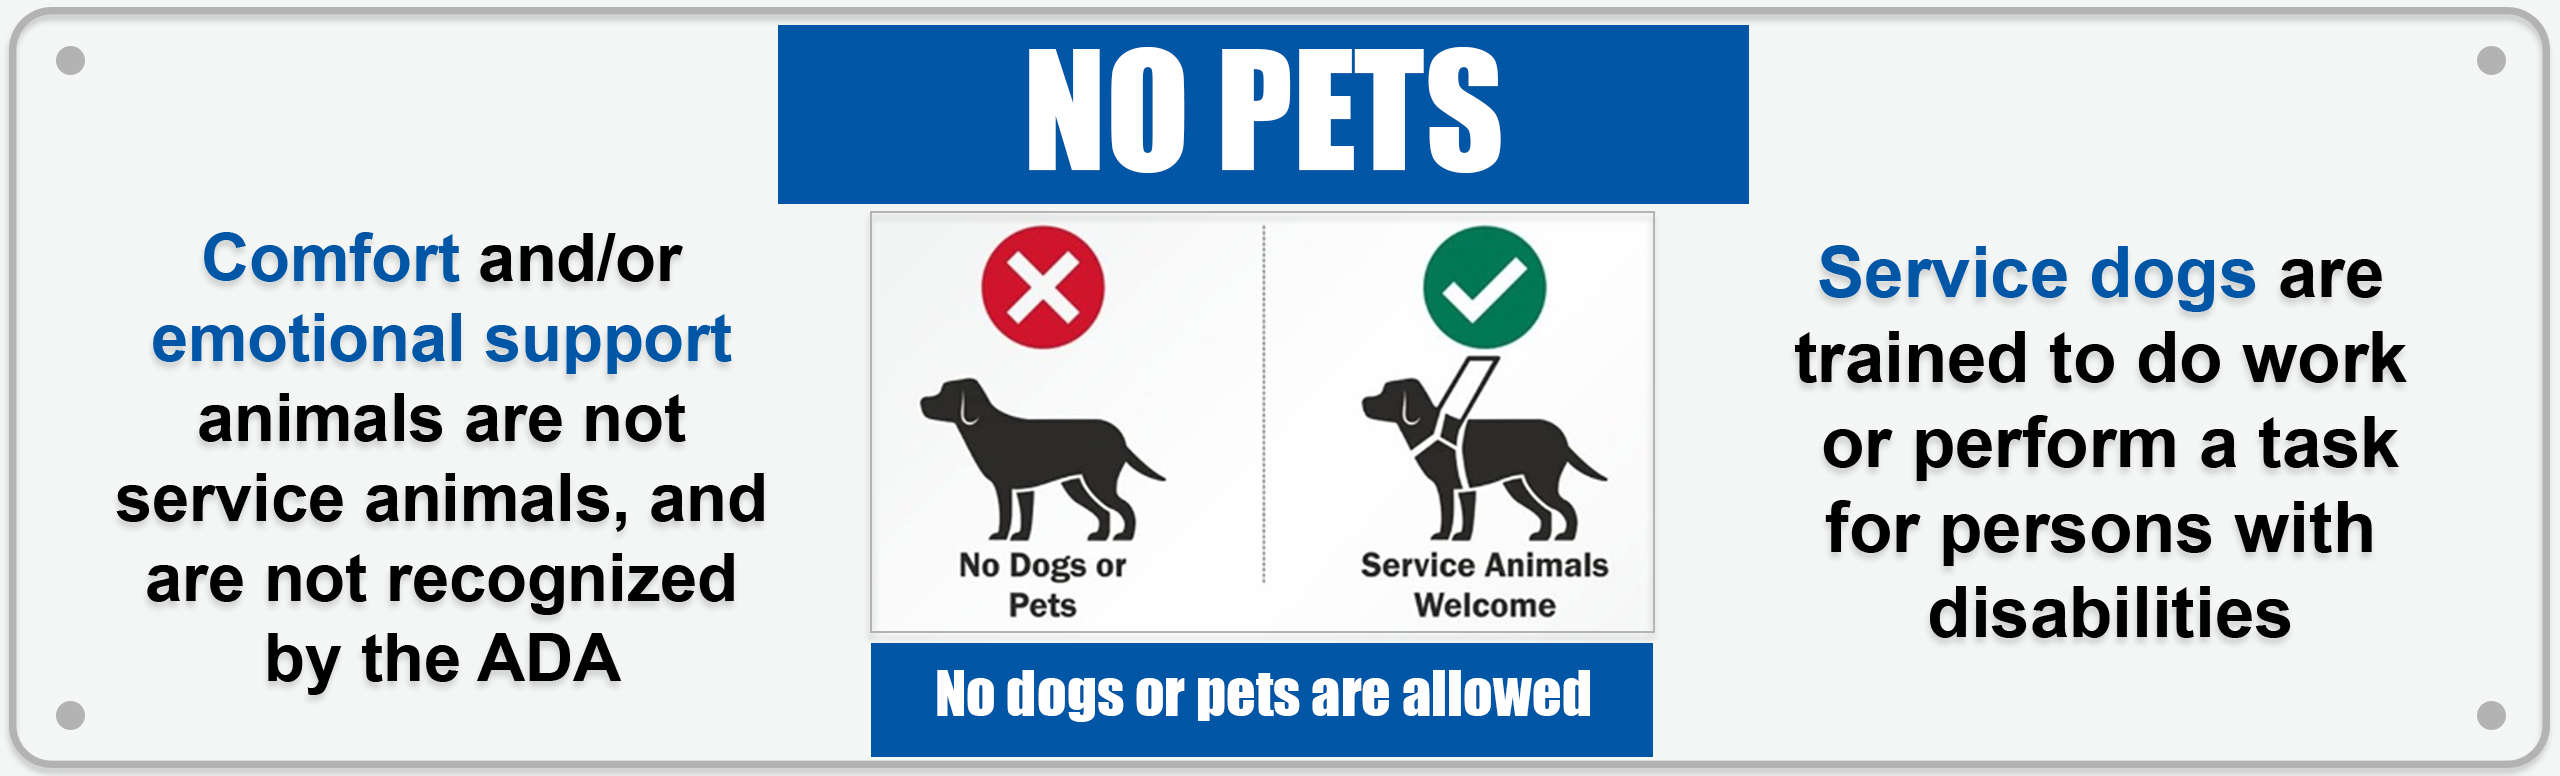 no pets or emotional support animals allowed in the center, service animals are allowed